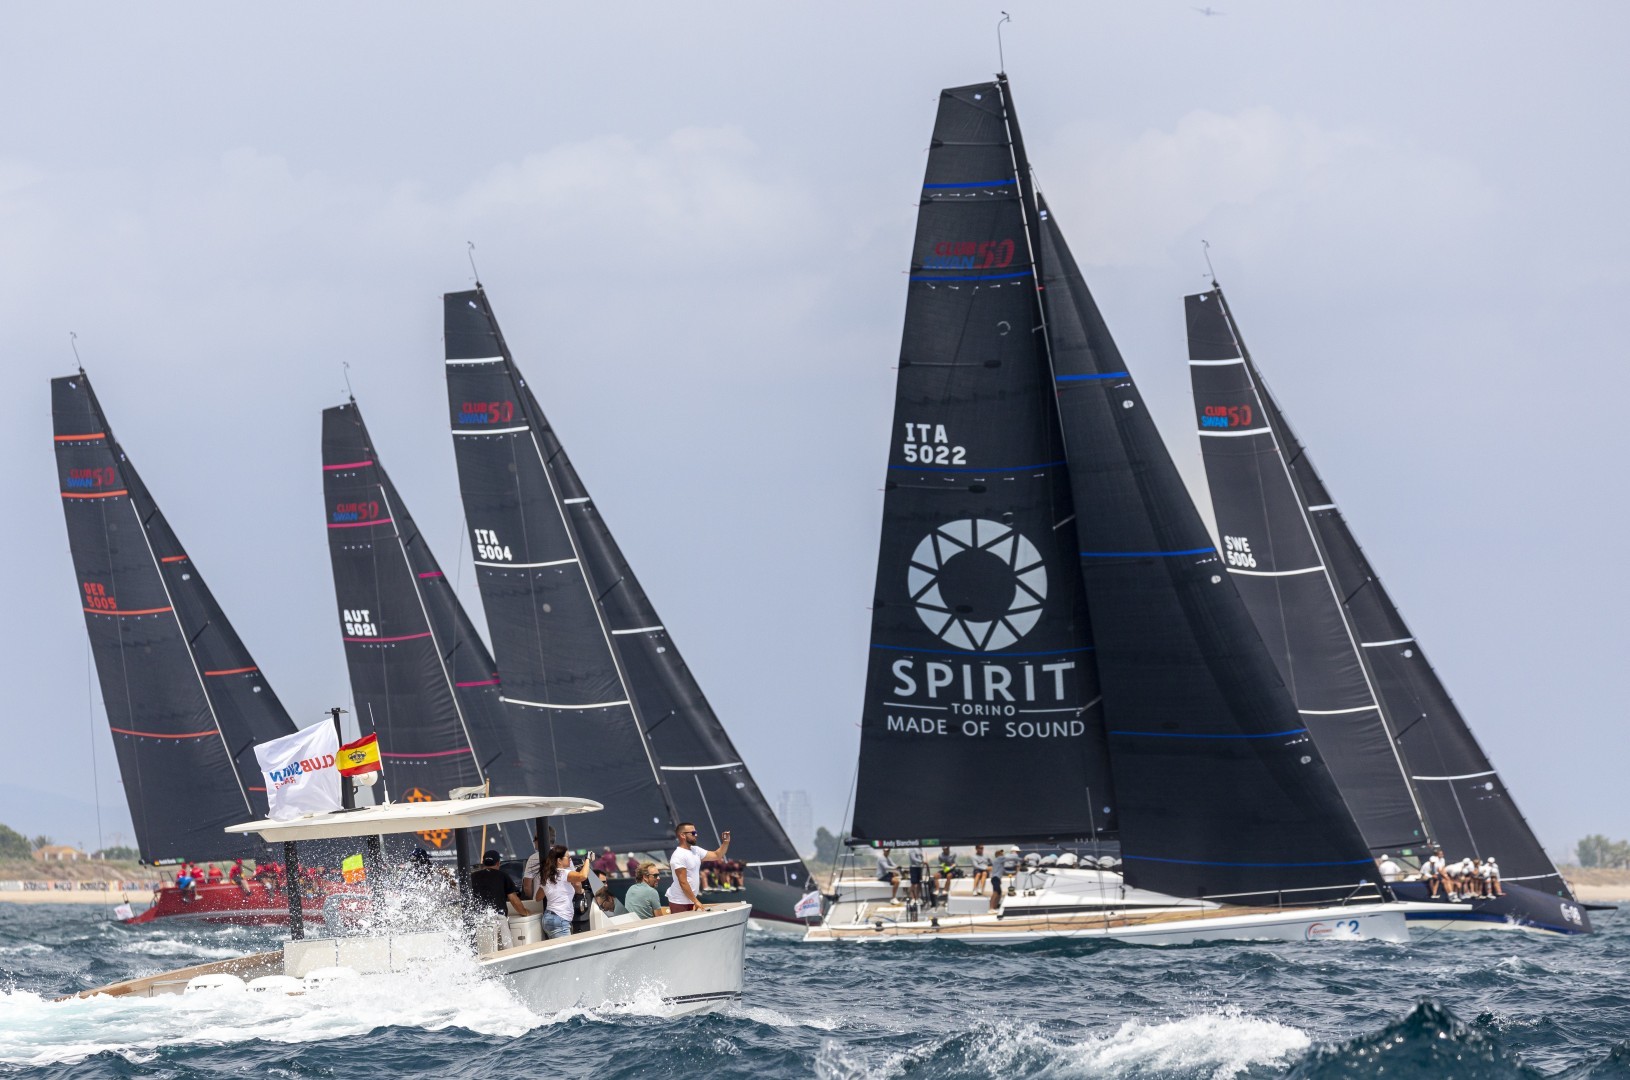 Big wind, big waves and great racing on the opening day of the Swan One Design Worlds